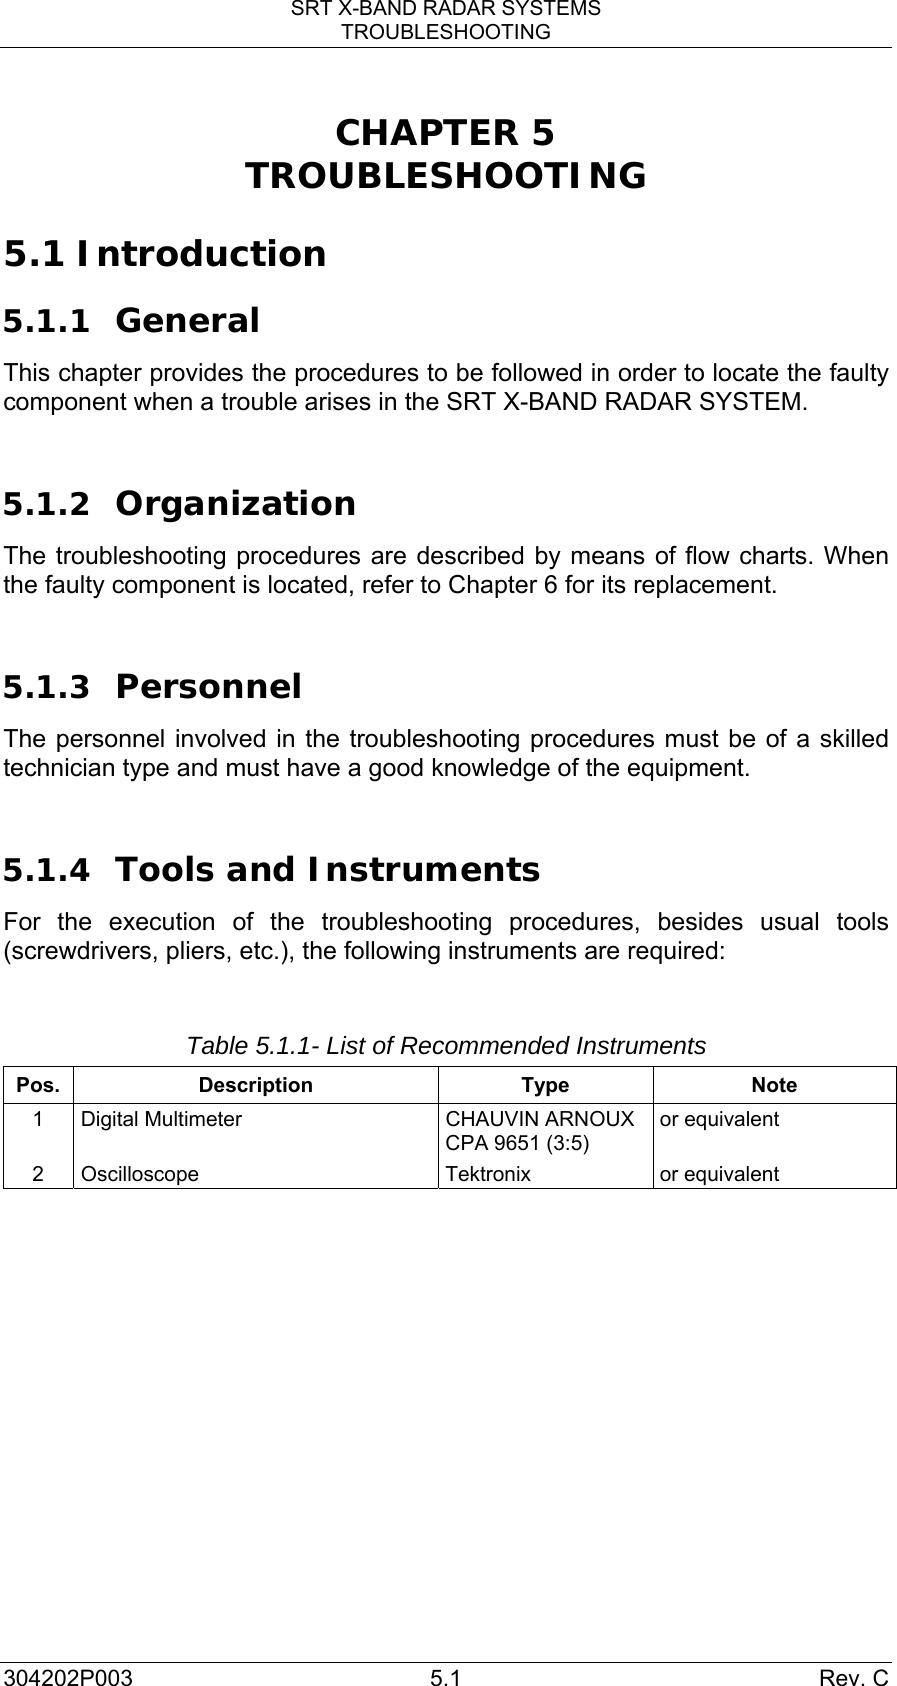 SRT X-BAND RADAR SYSTEMS TROUBLESHOOTING 304202P003 5.1  Rev. C CHAPTER 5 TROUBLESHOOTING  5.1 Introduction 5.1.1 General This chapter provides the procedures to be followed in order to locate the faulty component when a trouble arises in the SRT X-BAND RADAR SYSTEM.  5.1.2 Organization The troubleshooting procedures are described by means of flow charts. When the faulty component is located, refer to Chapter 6 for its replacement.  5.1.3 Personnel The personnel involved in the troubleshooting procedures must be of a skilled technician type and must have a good knowledge of the equipment.  5.1.4 Tools and Instruments For the execution of the troubleshooting procedures, besides usual tools (screwdrivers, pliers, etc.), the following instruments are required:  Table 5.1.1- List of Recommended Instruments Pos. Description  Type  Note 1  Digital Multimeter  CHAUVIN ARNOUX CPA 9651 (3:5) or equivalent 2 Oscilloscope  Tektronix  or equivalent 